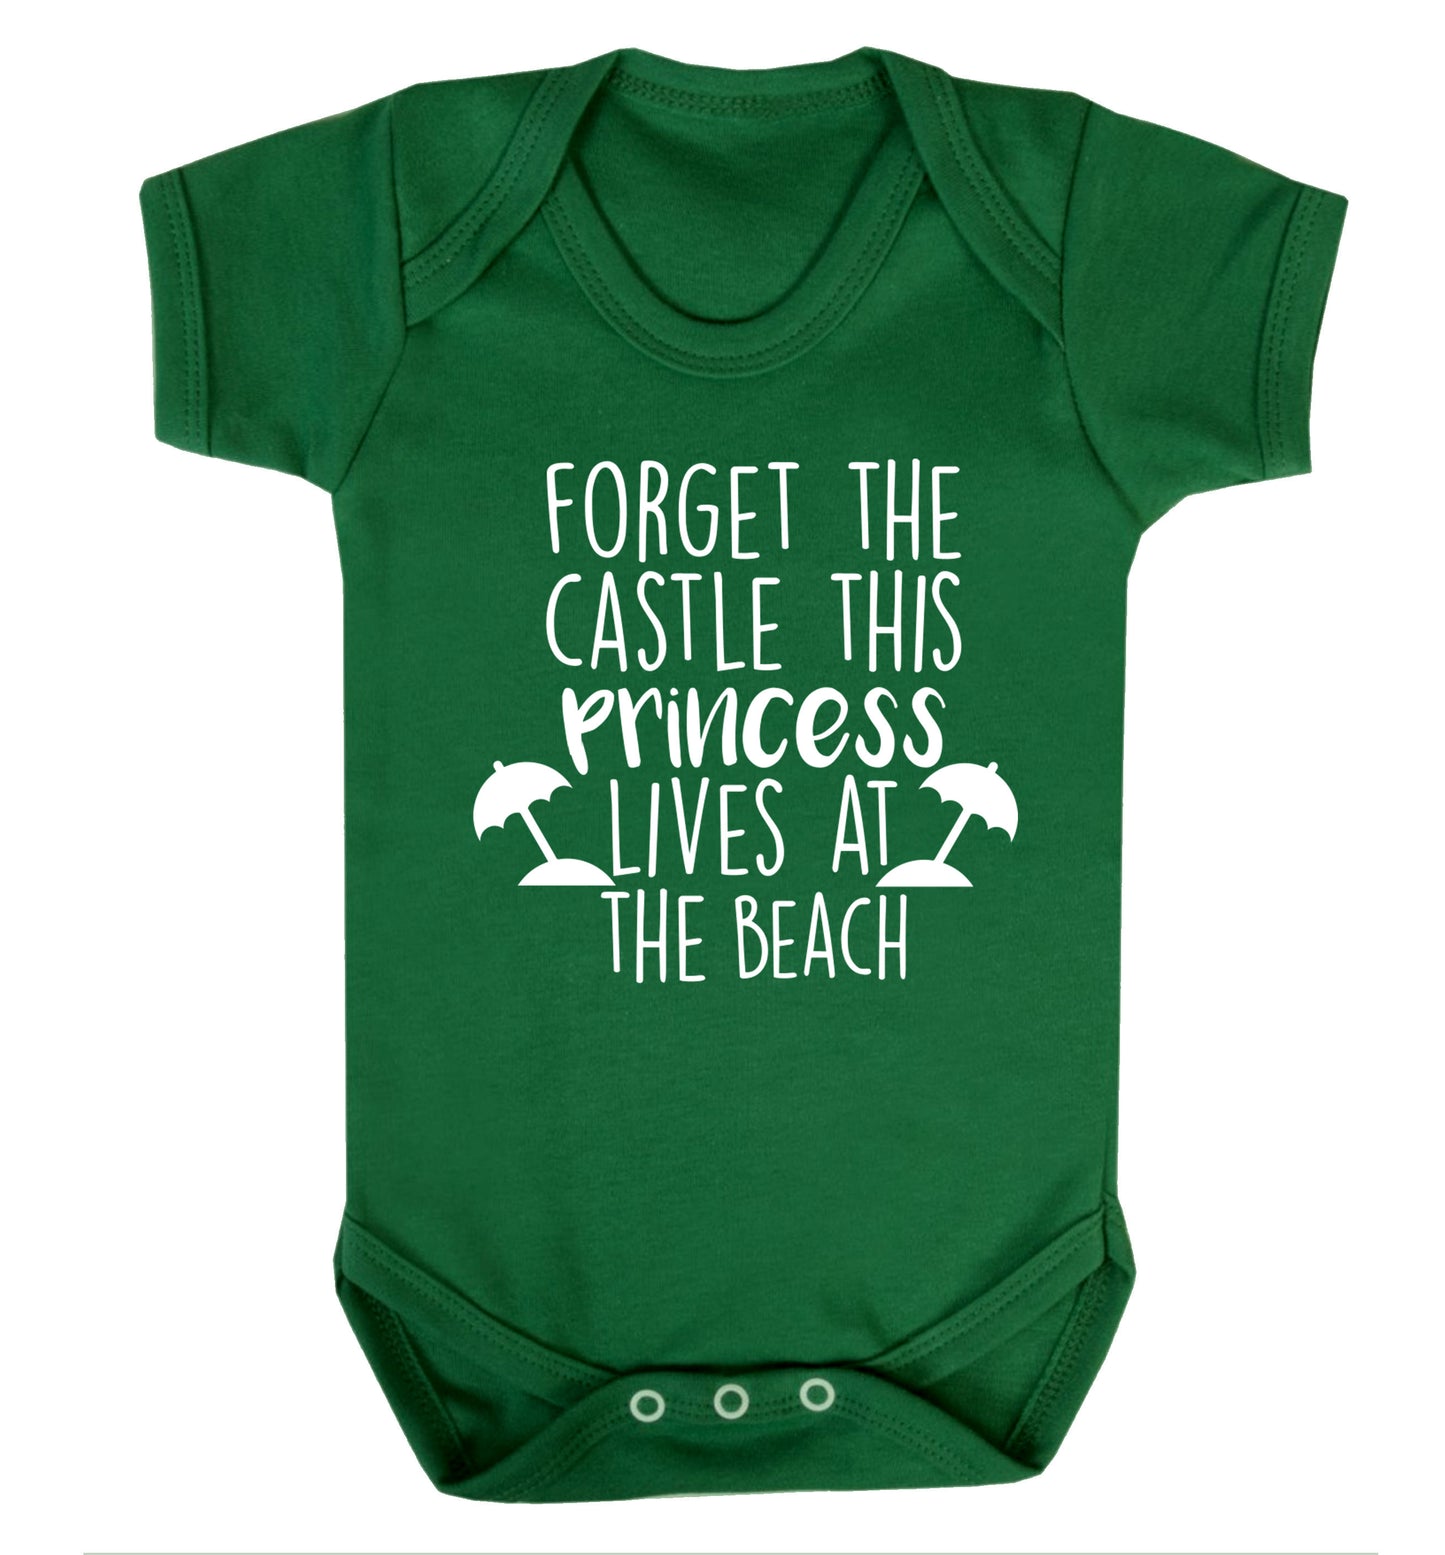 Forget the castle this princess lives at the beach Baby Vest green 18-24 months